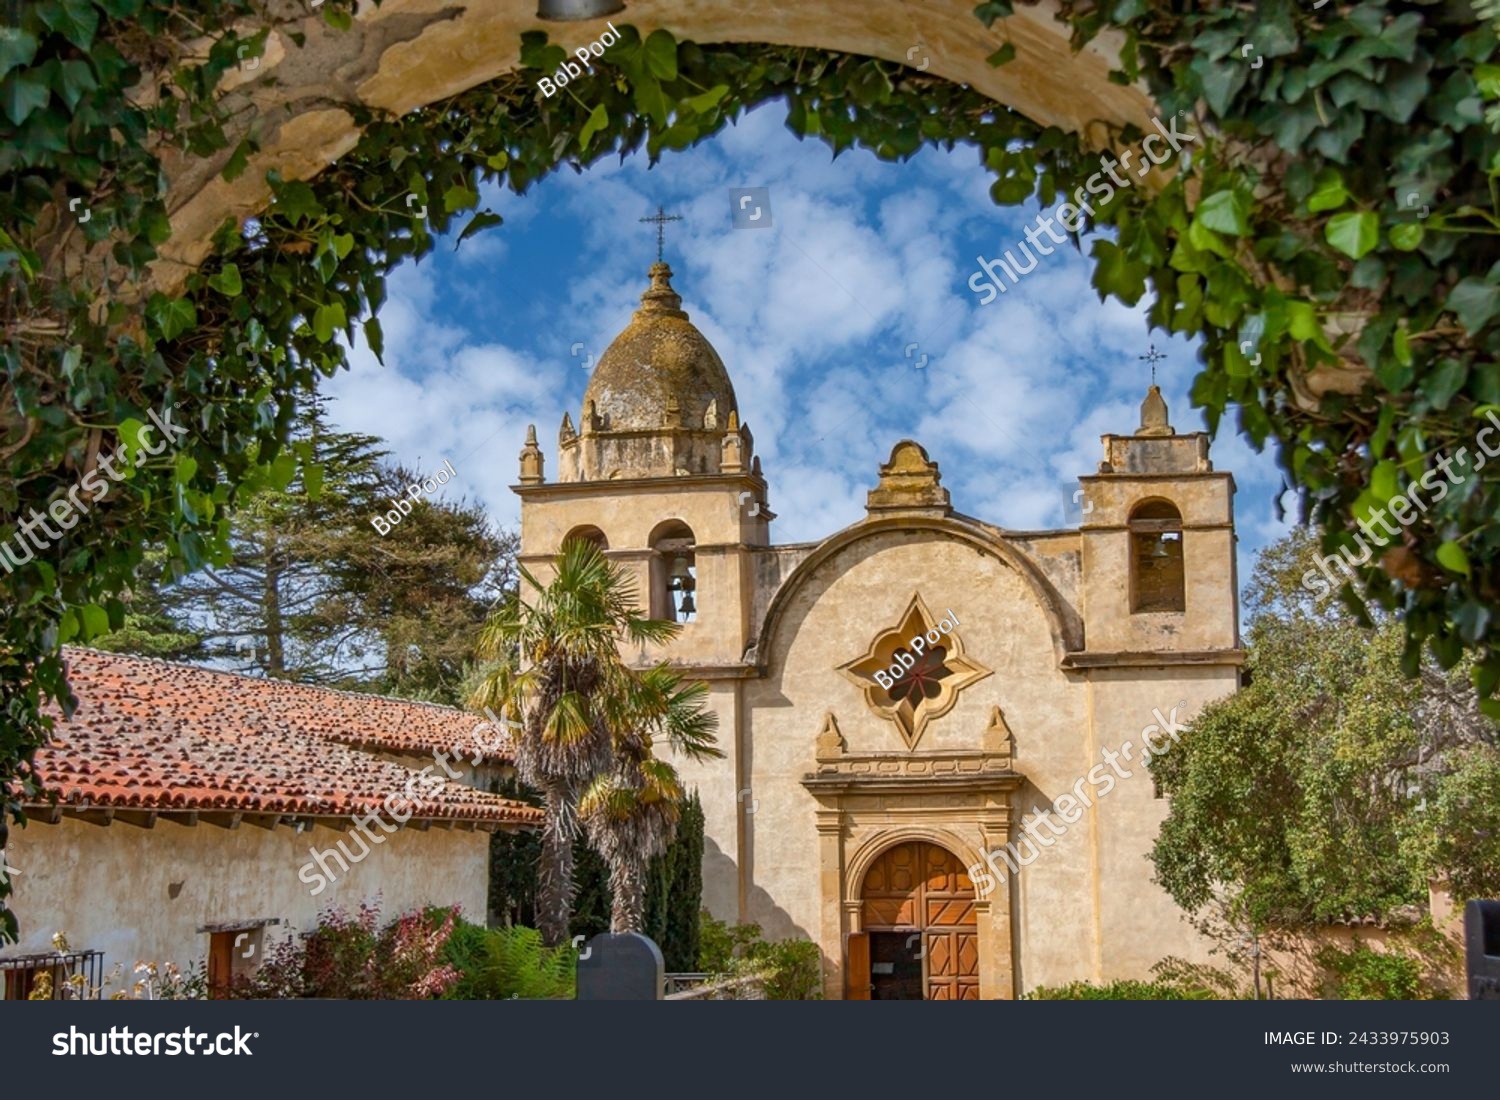 Carmel Mission.  The Misión de San Carlos Borromeo de Carmelo, first built in 1797, is one of the most authentically restored Roman Catholic mission churches in California #2433975903